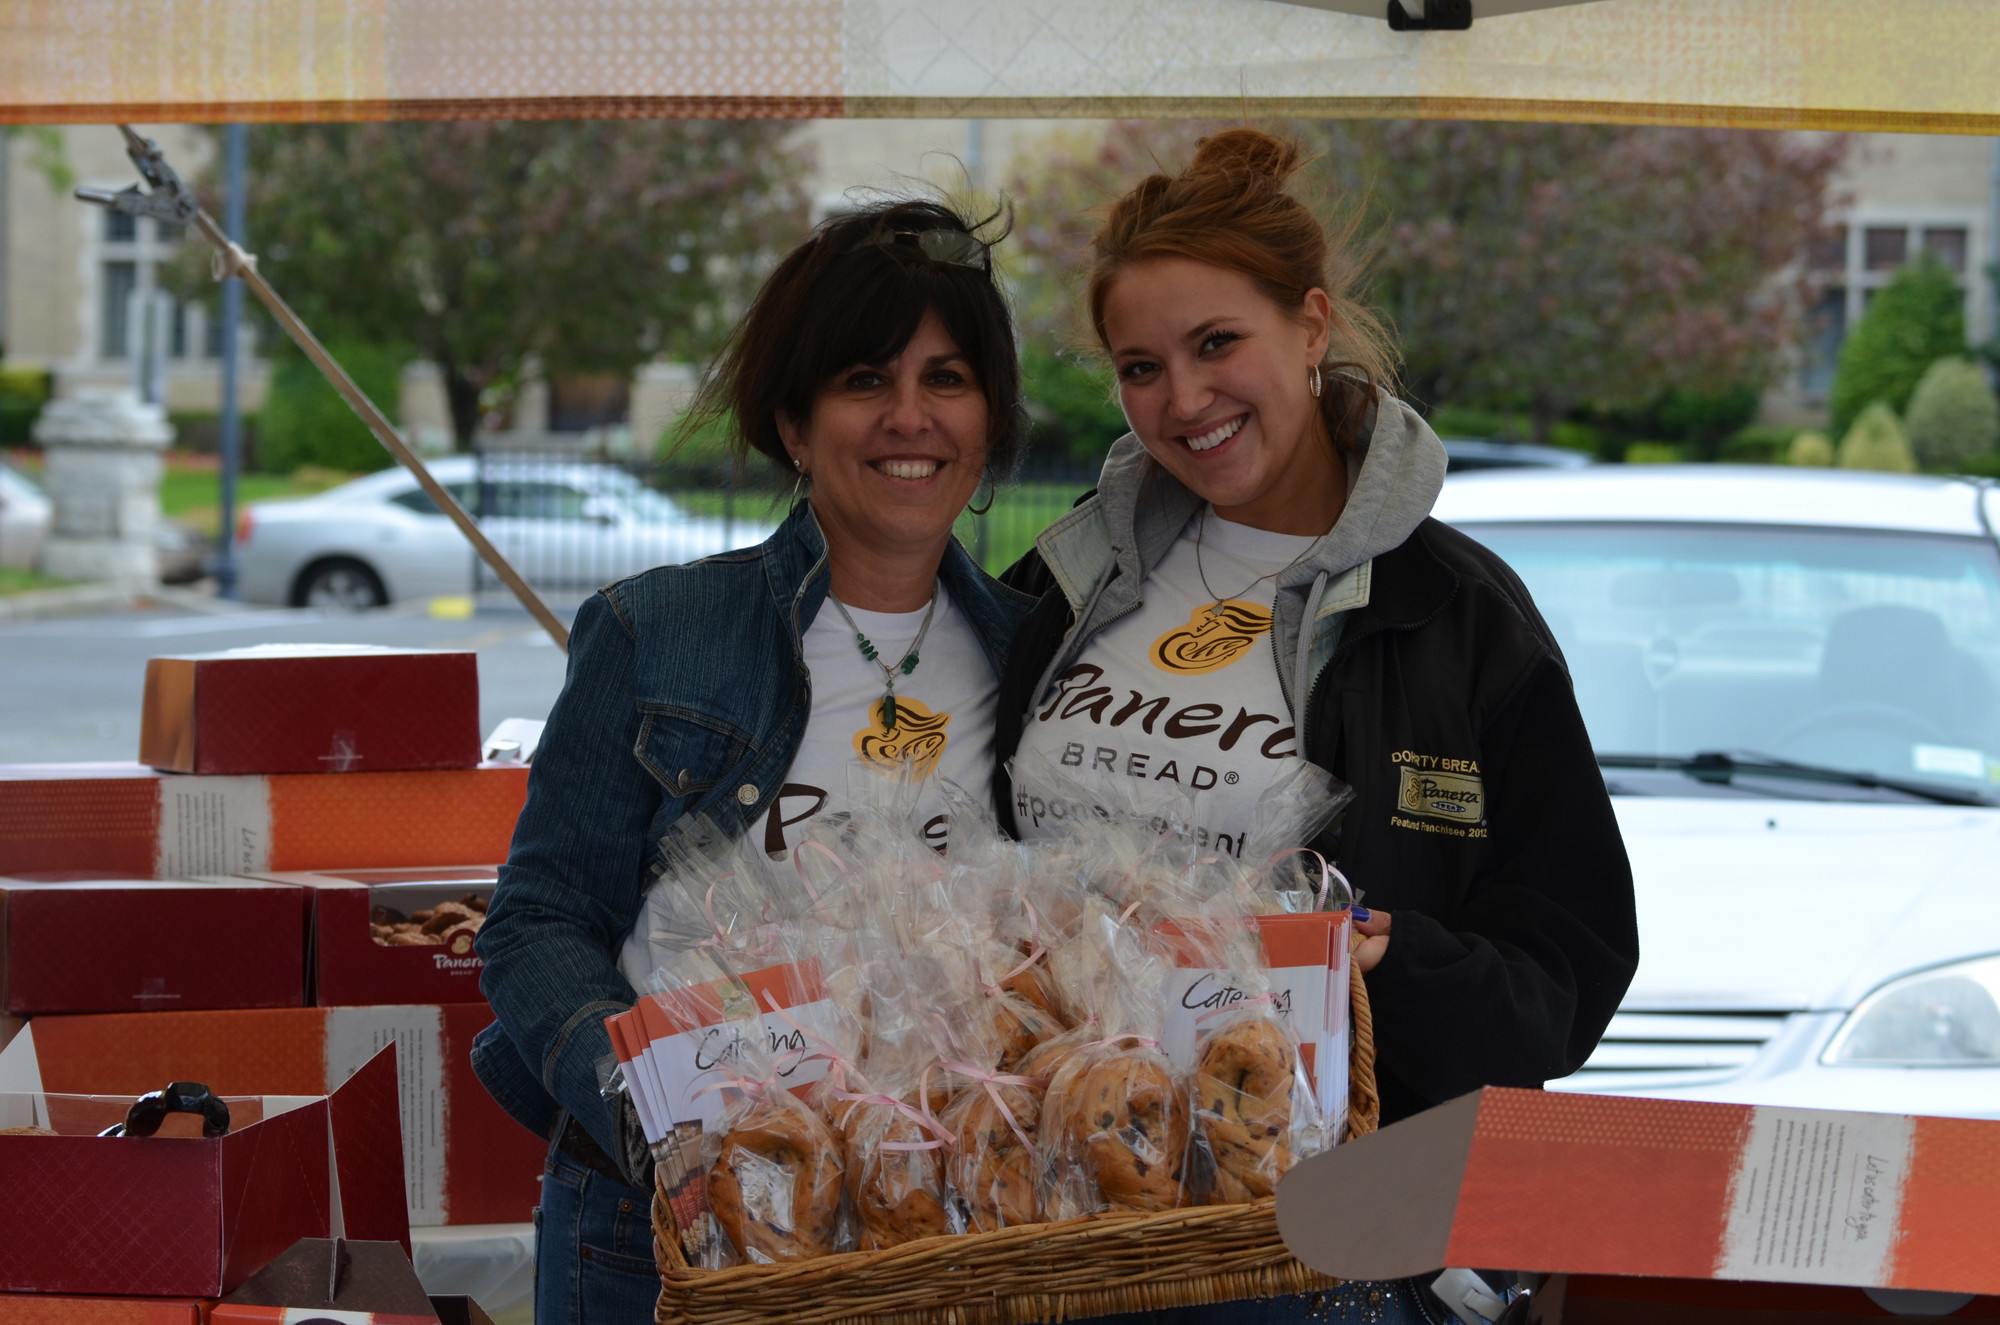 Lisa Spero and Jessica Wilson of Panera Bread showed off some of the treats from their bakery.